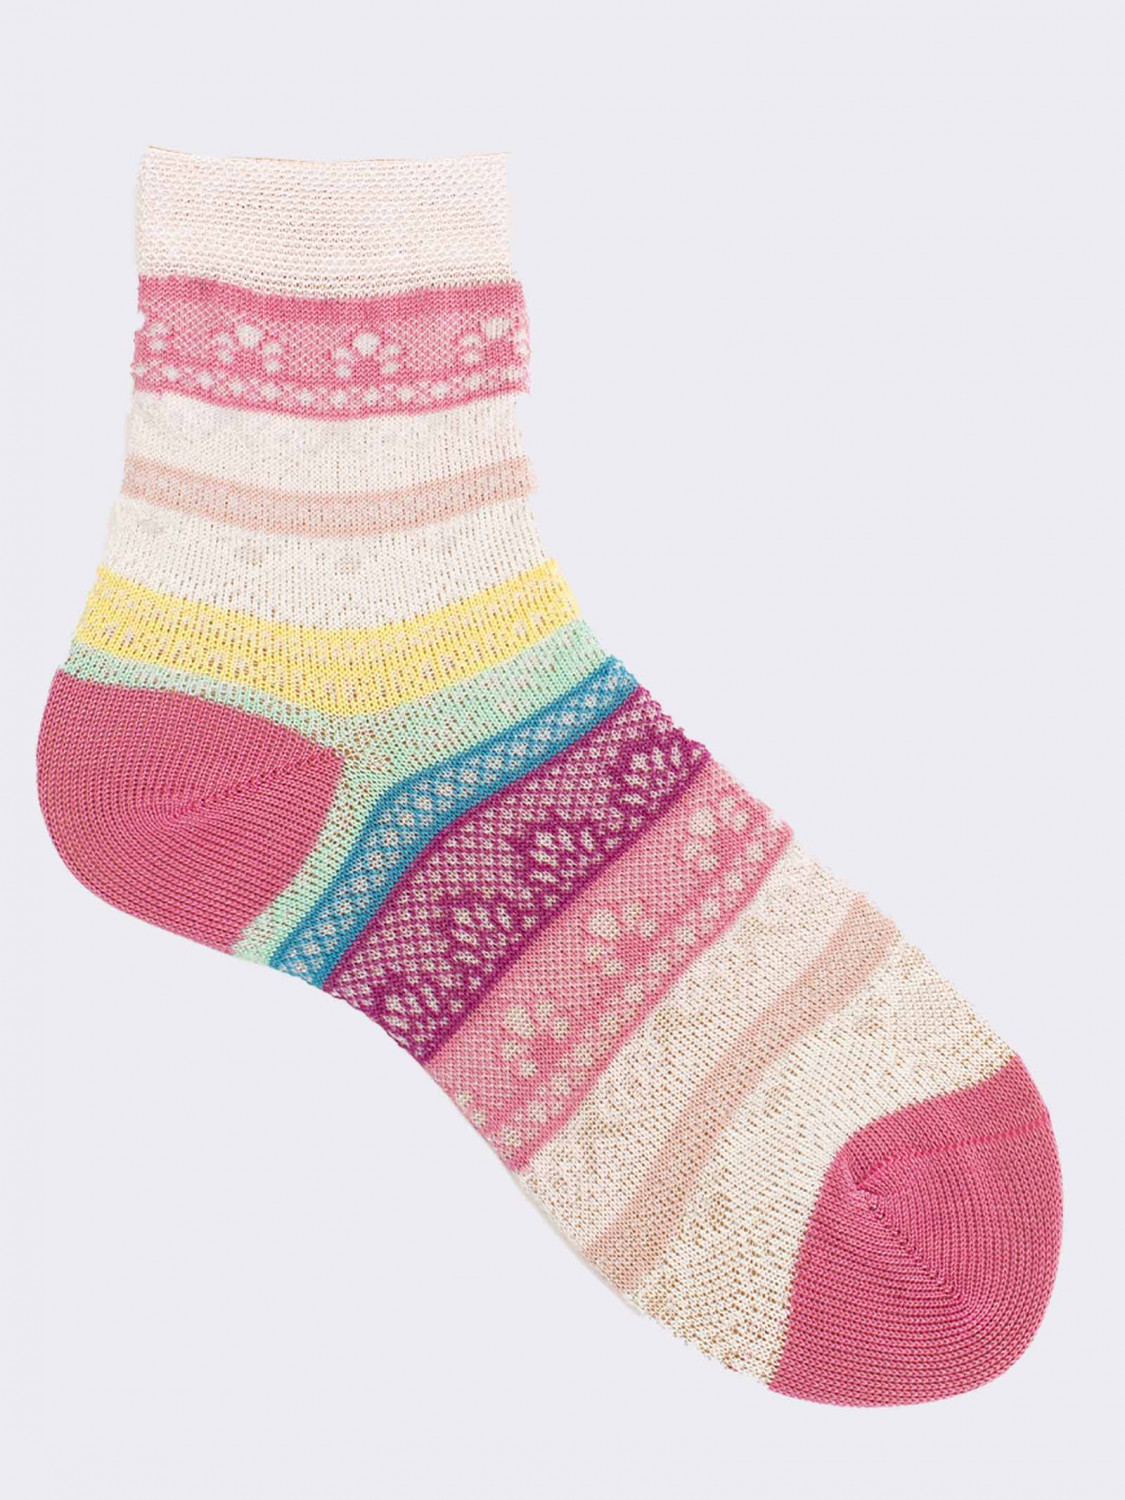 Girl's short socks with colorful lace inserts